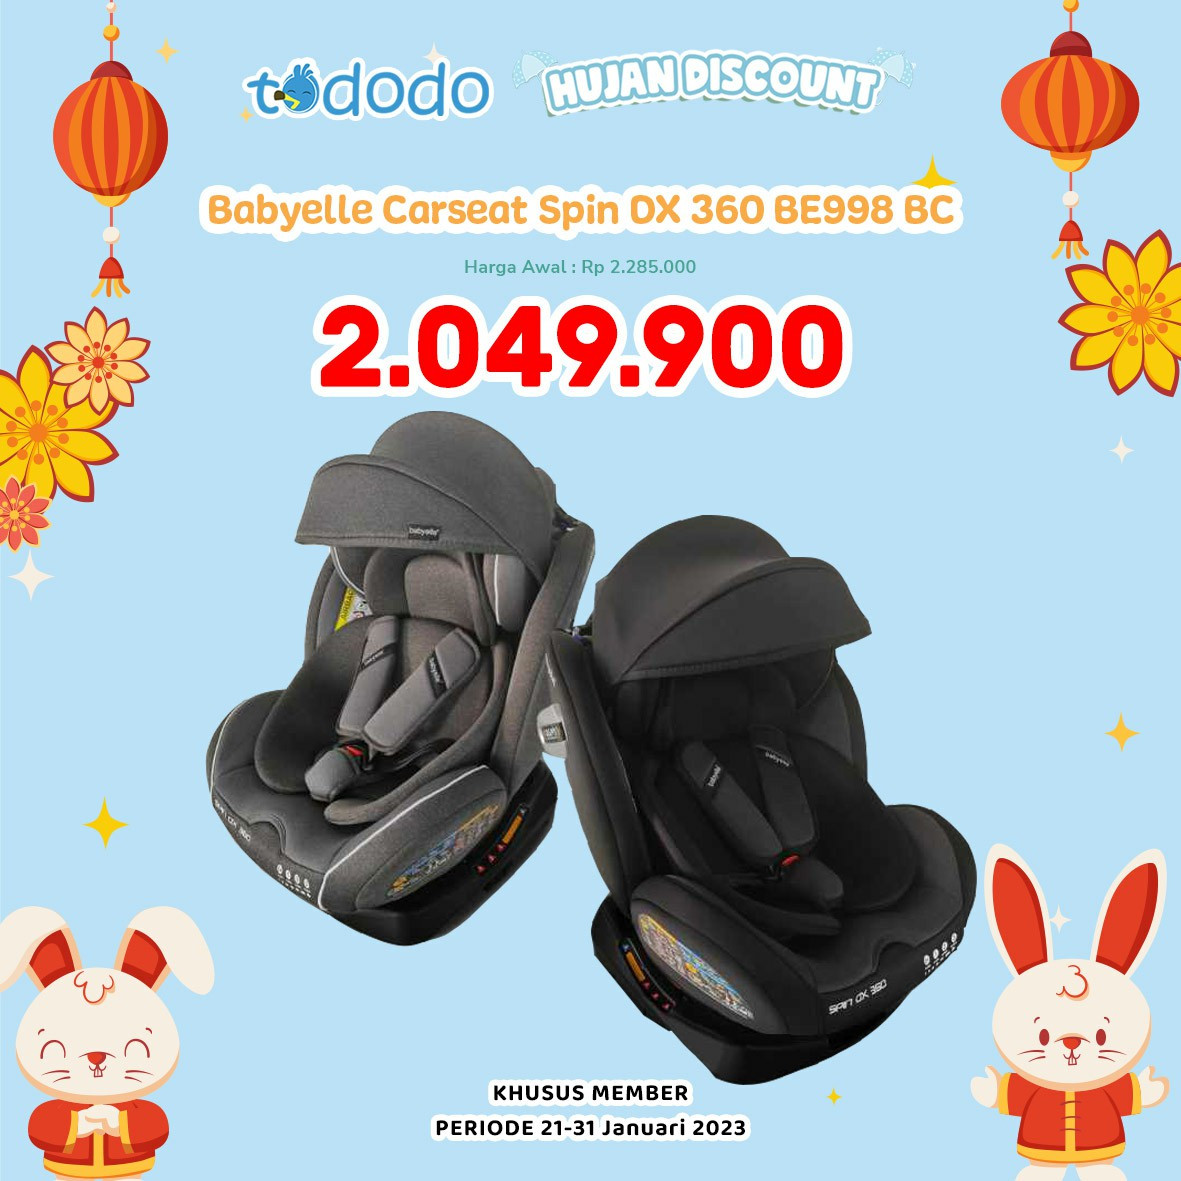 BABYELLE CAR SEAT SPIN DX 360 BE-998BC